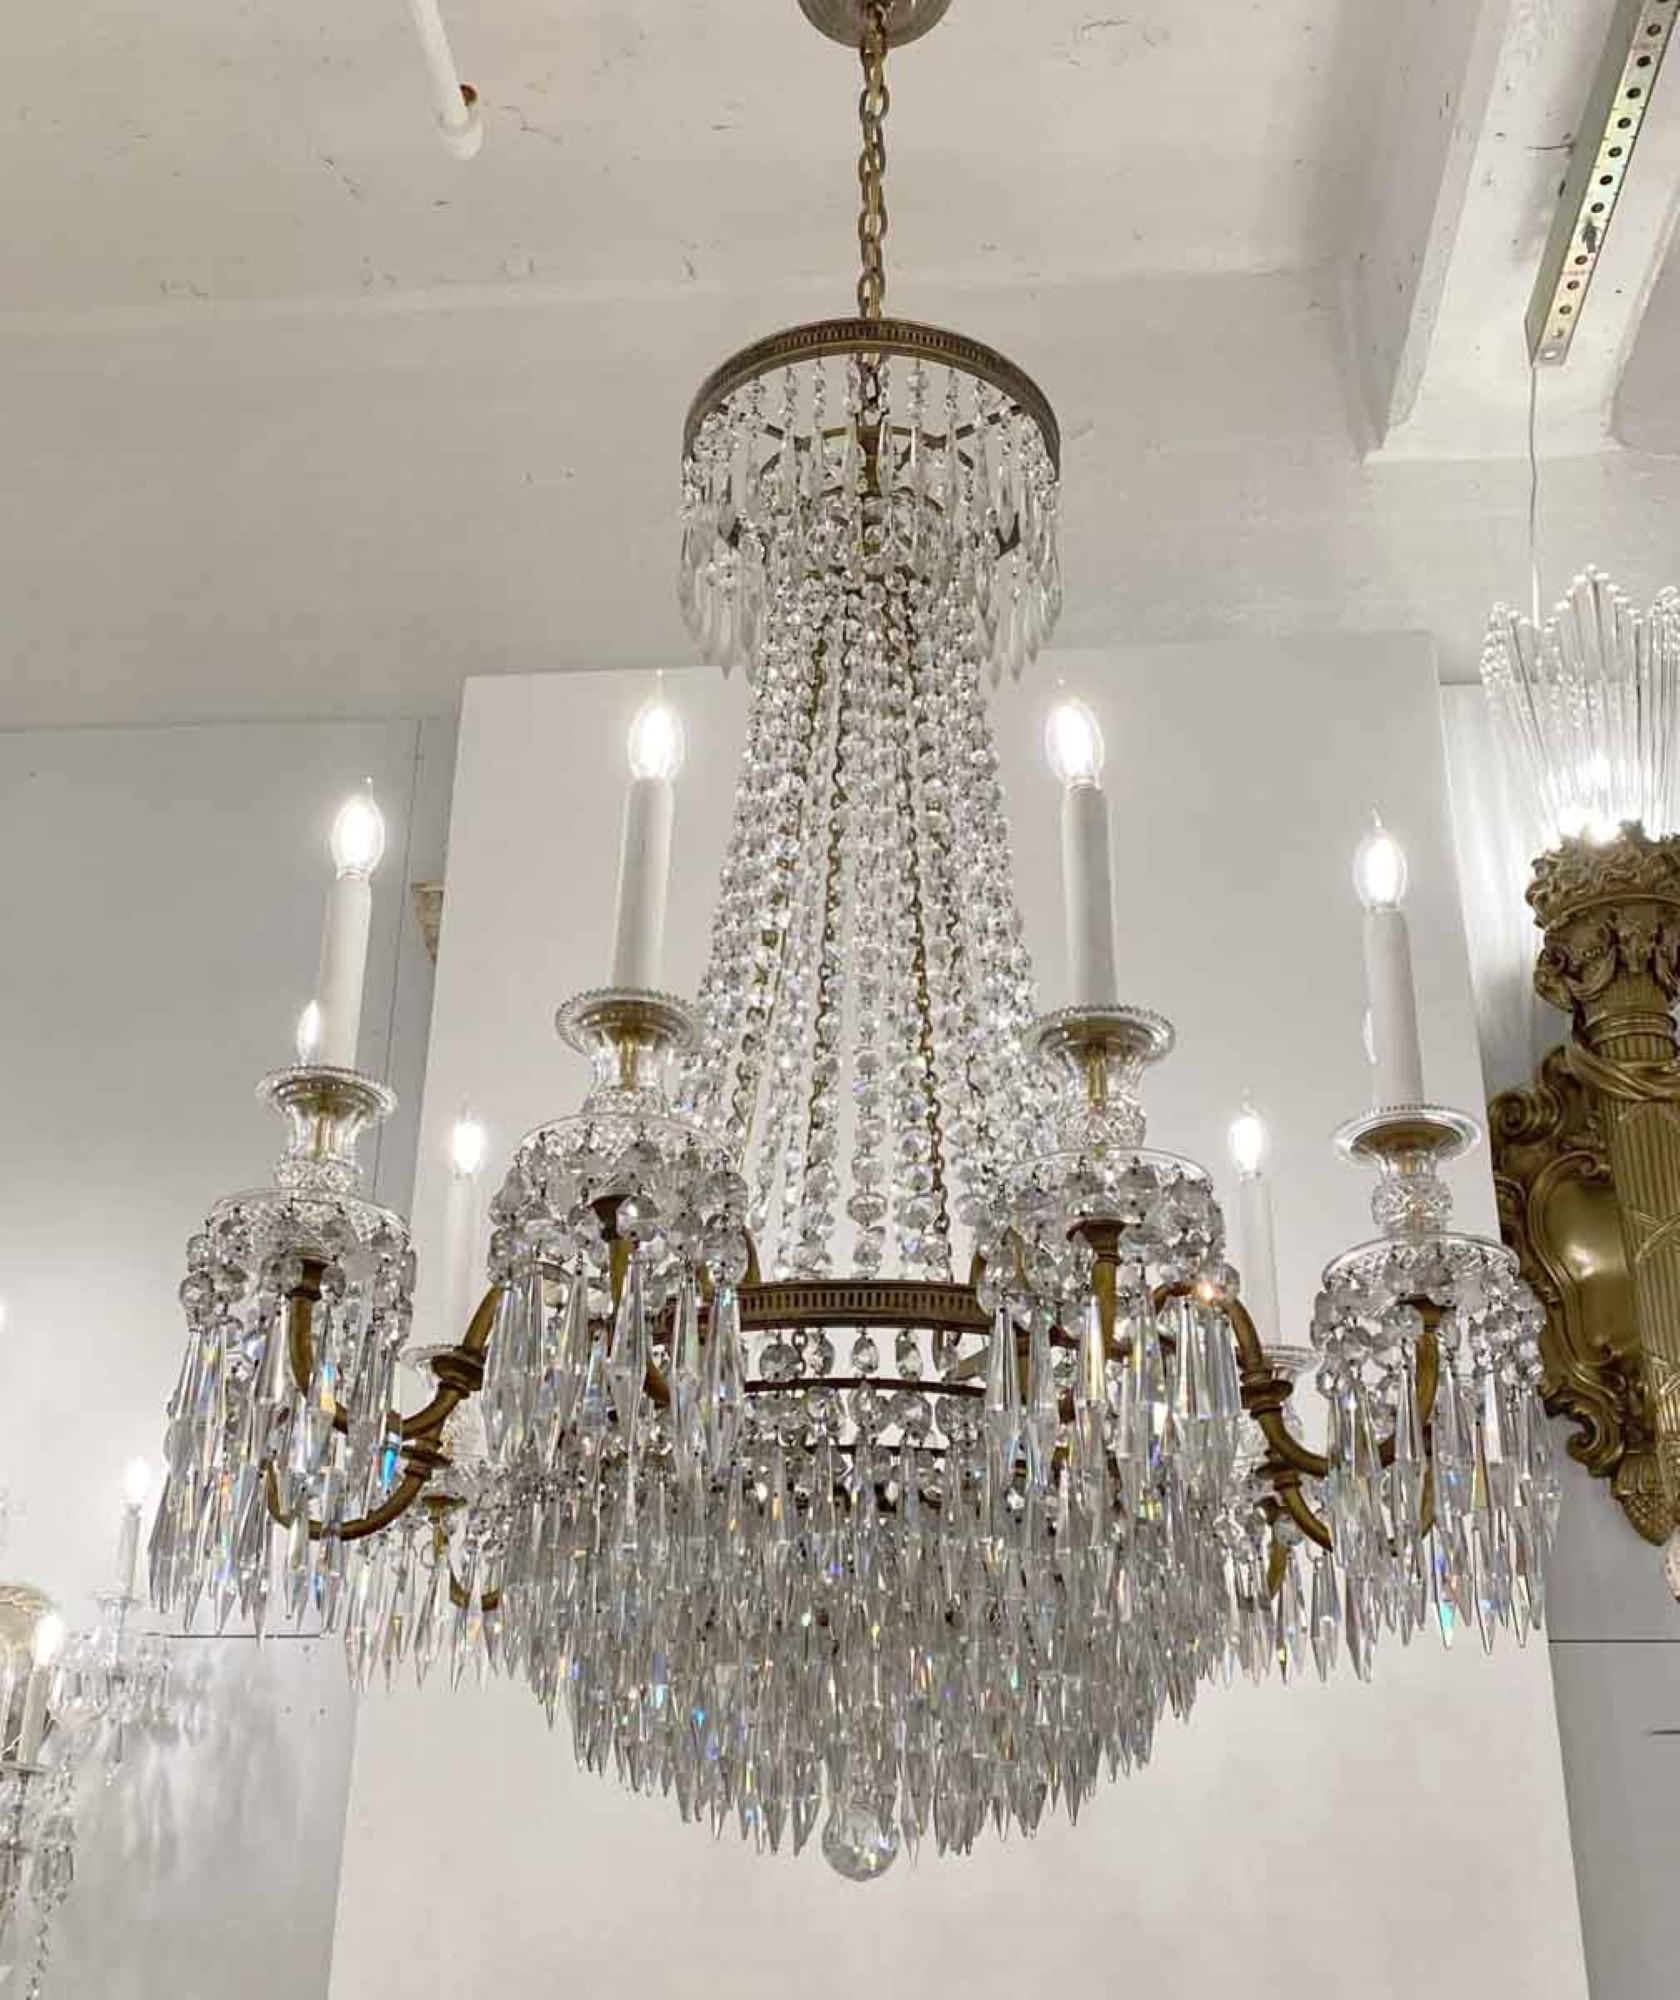 1920s French Regency Crystal and Bronze Chandelier Antique with Hand Cut Crystal In Good Condition For Sale In New York, NY